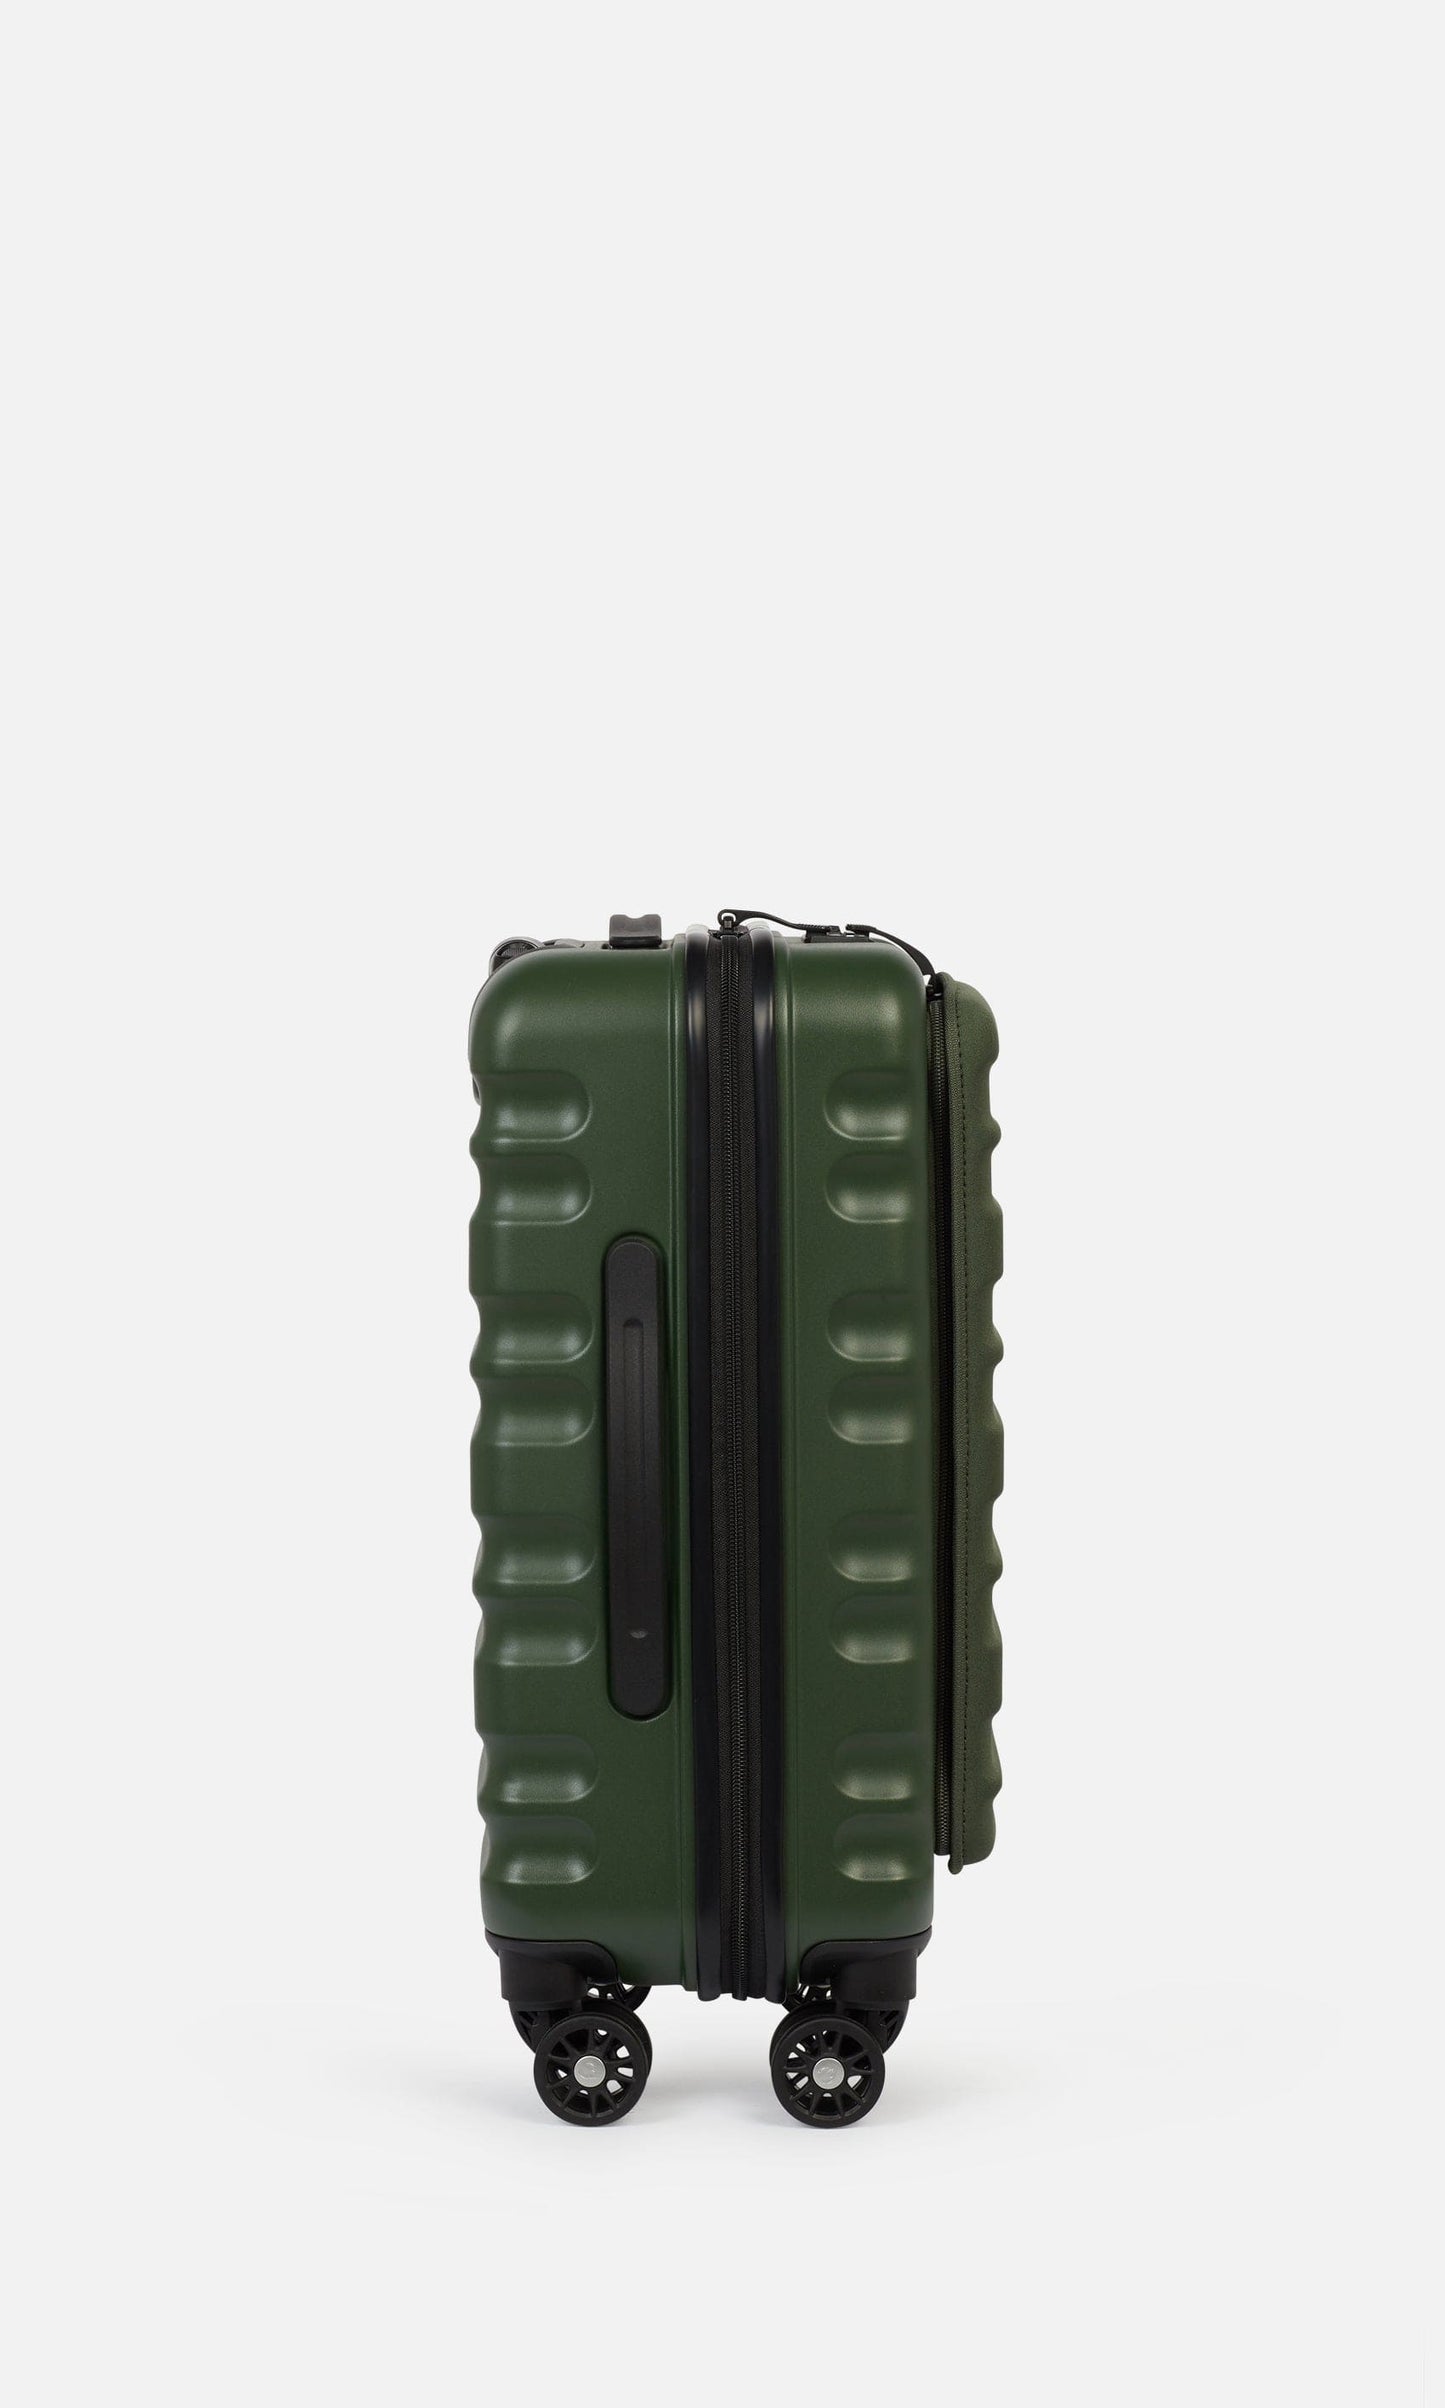 Antler Luggage -  Clifton cabin with pocket in woodland green - Hard Suitcases Clifton Cabin Pocket Suitcase Woodland Green | Hard Suitcase | Antler UK